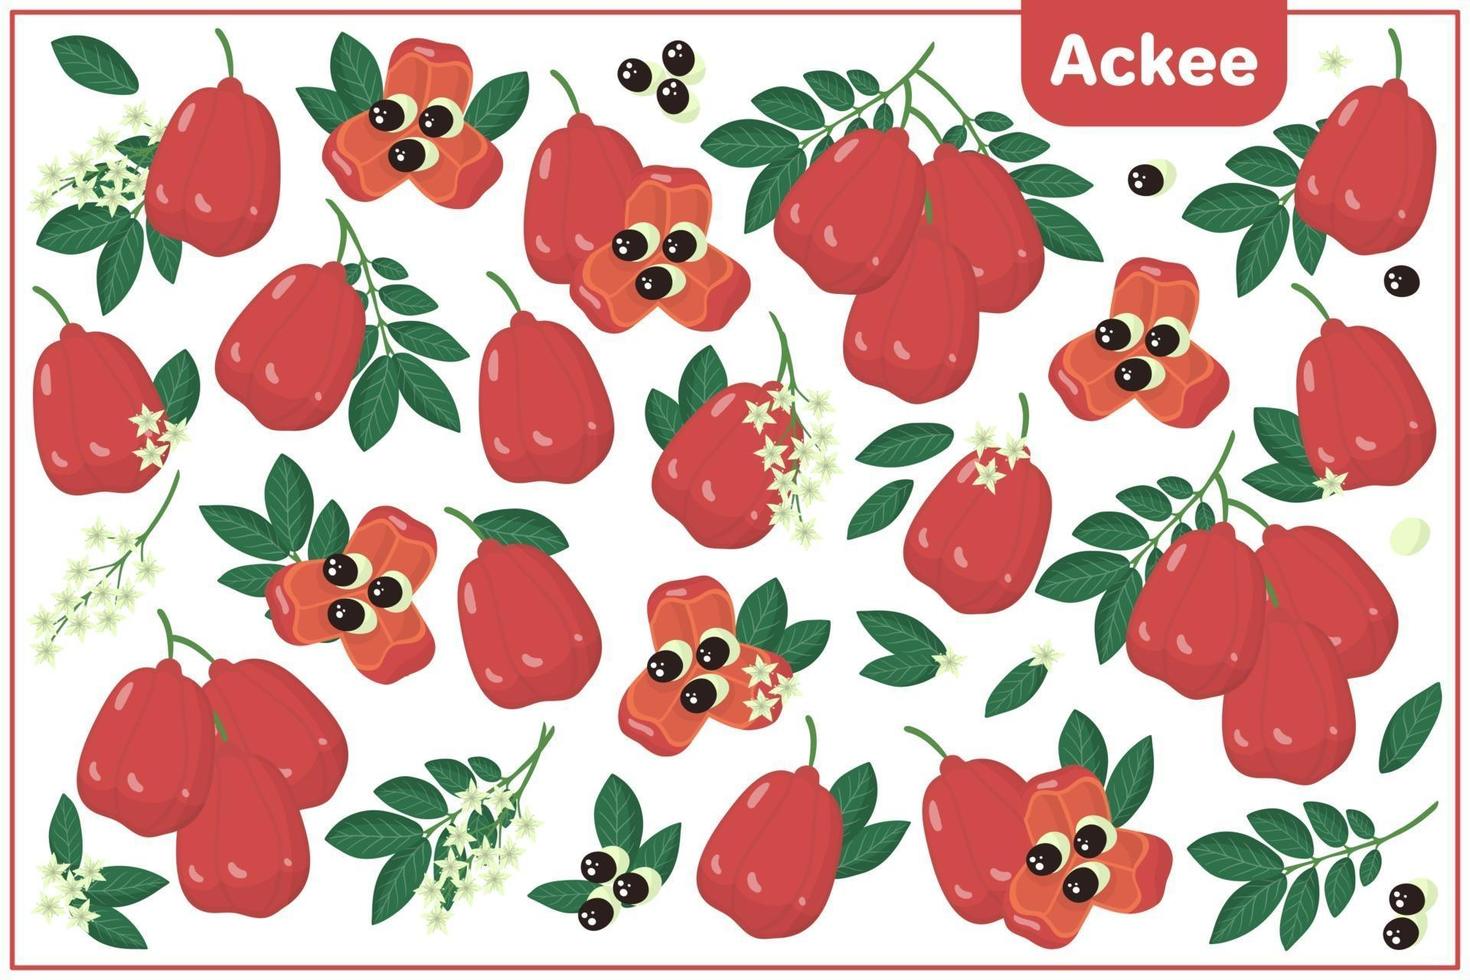 Set of vector cartoon illustrations with Ackee exotic fruits, flowers and leaves isolated on white background